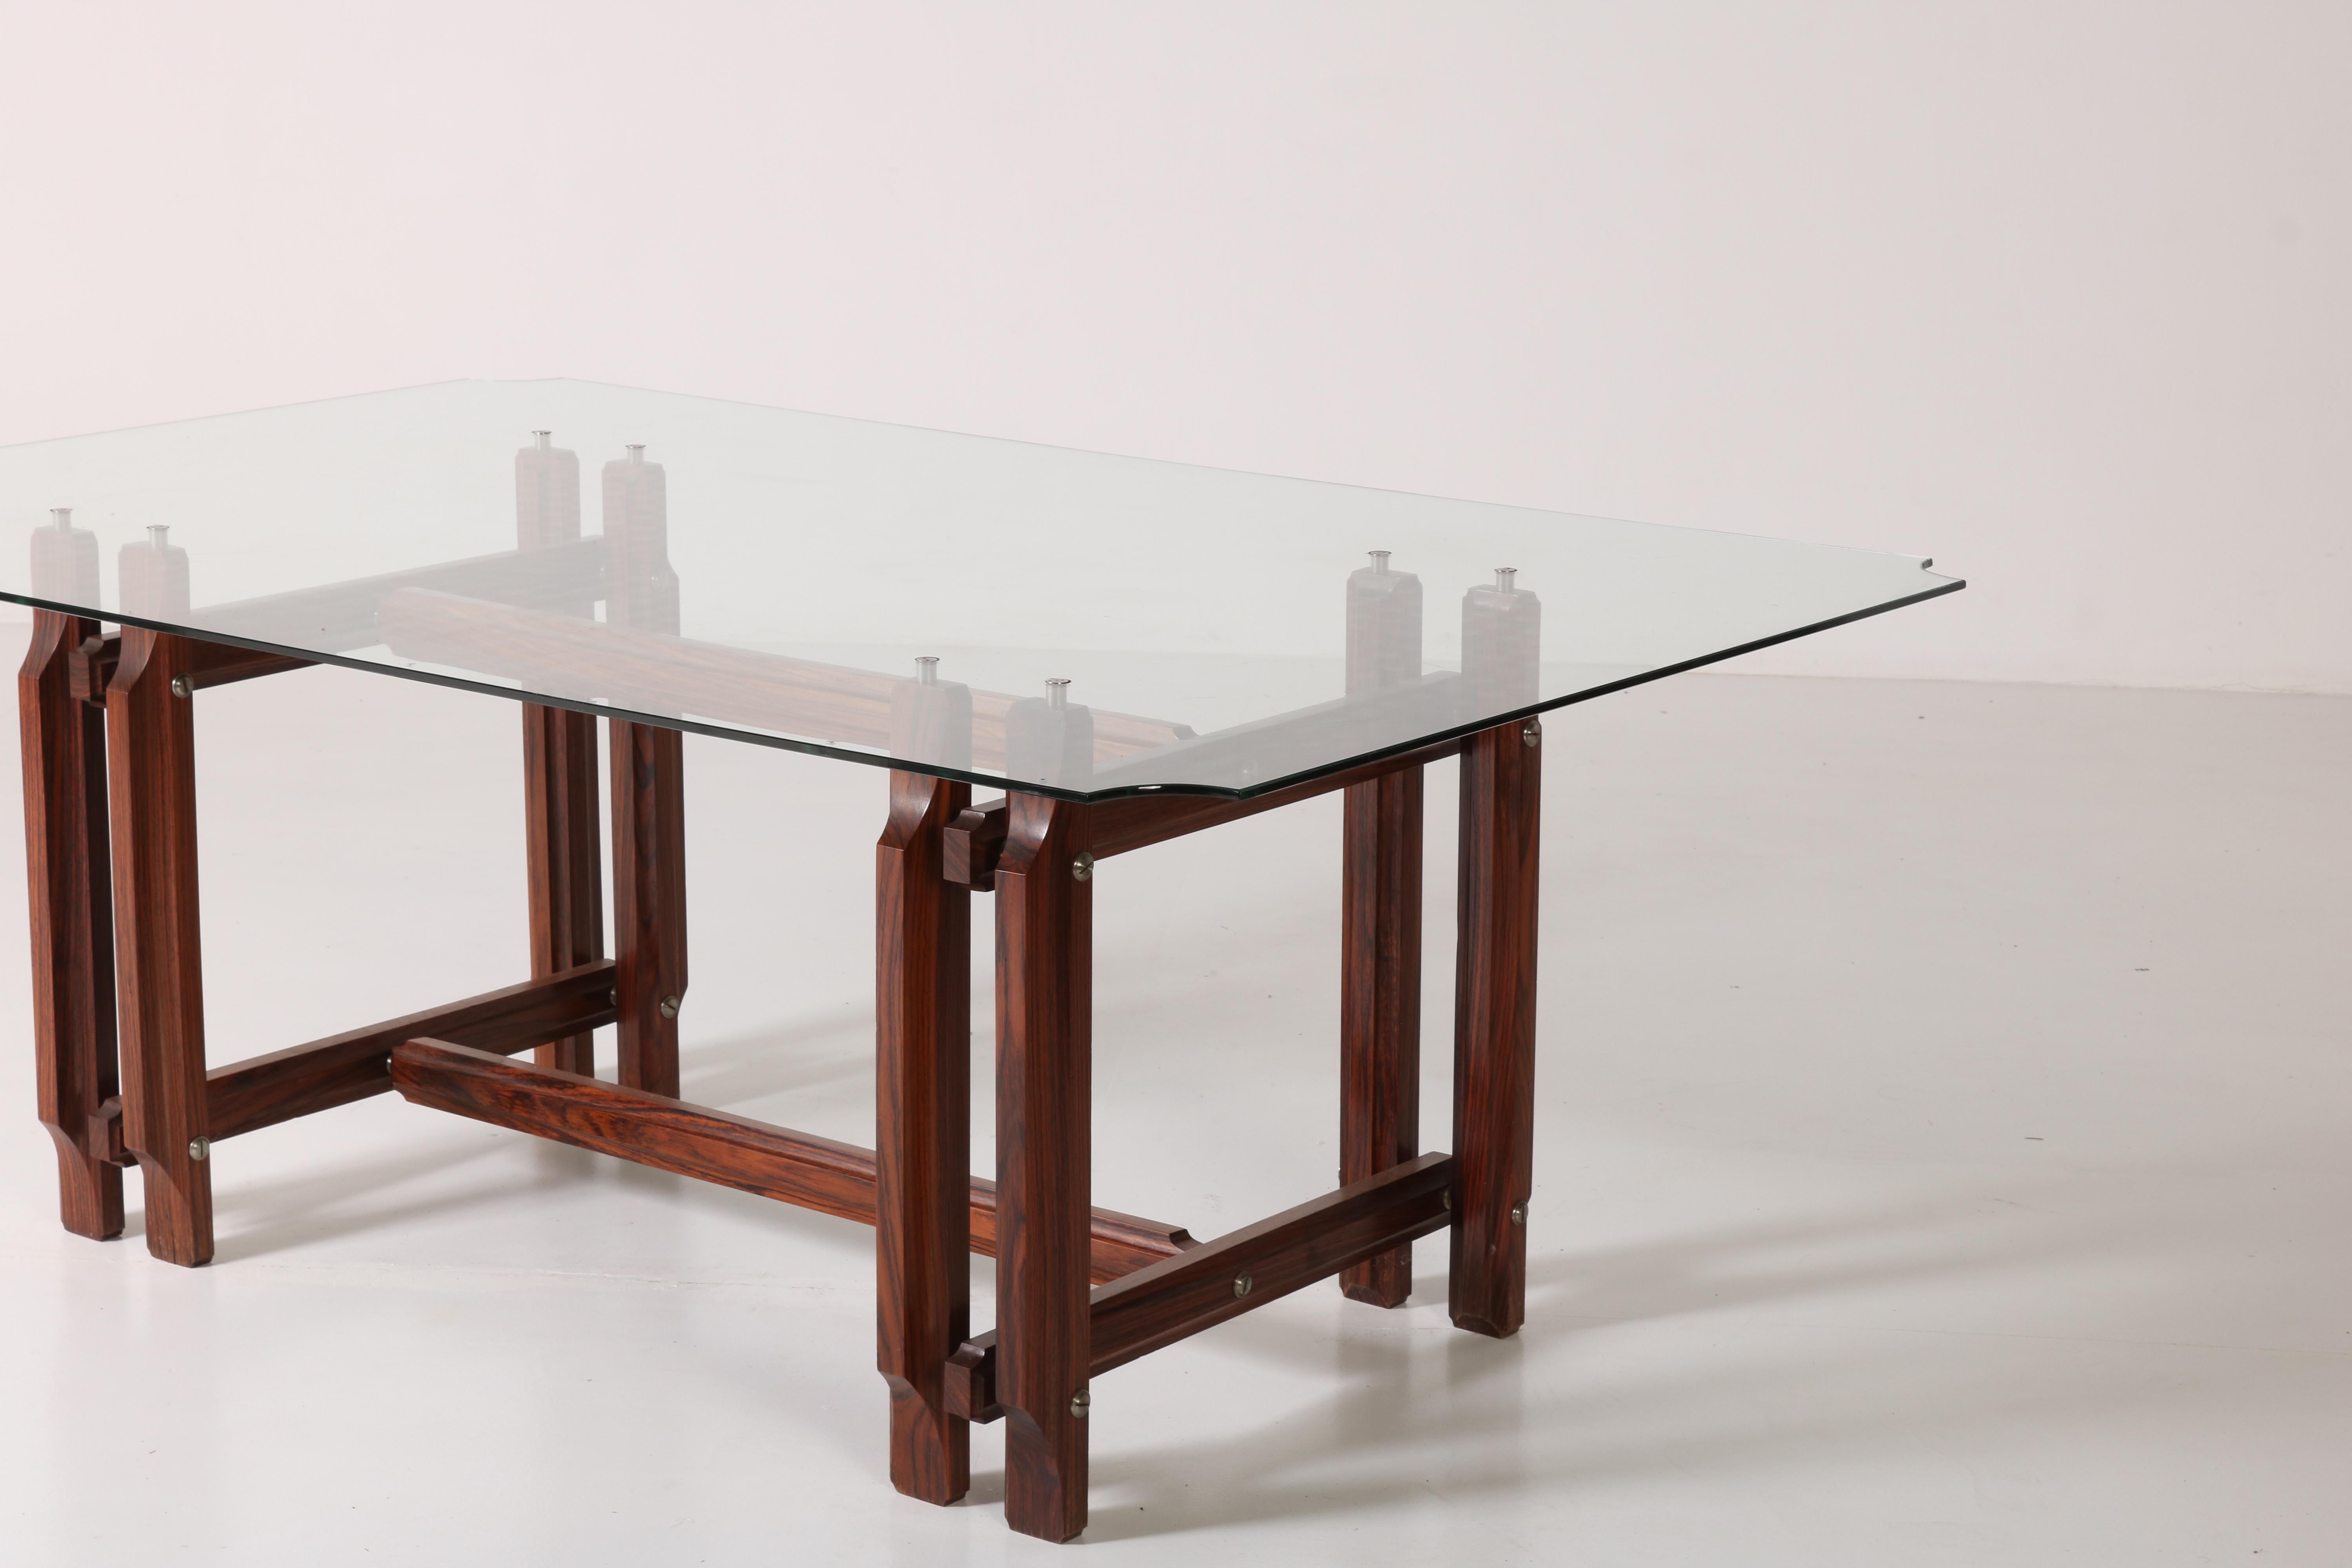 Big Wood Table Crystal Tempered Top by Vittorio Dassi, Italian Design 1960s For Sale 3